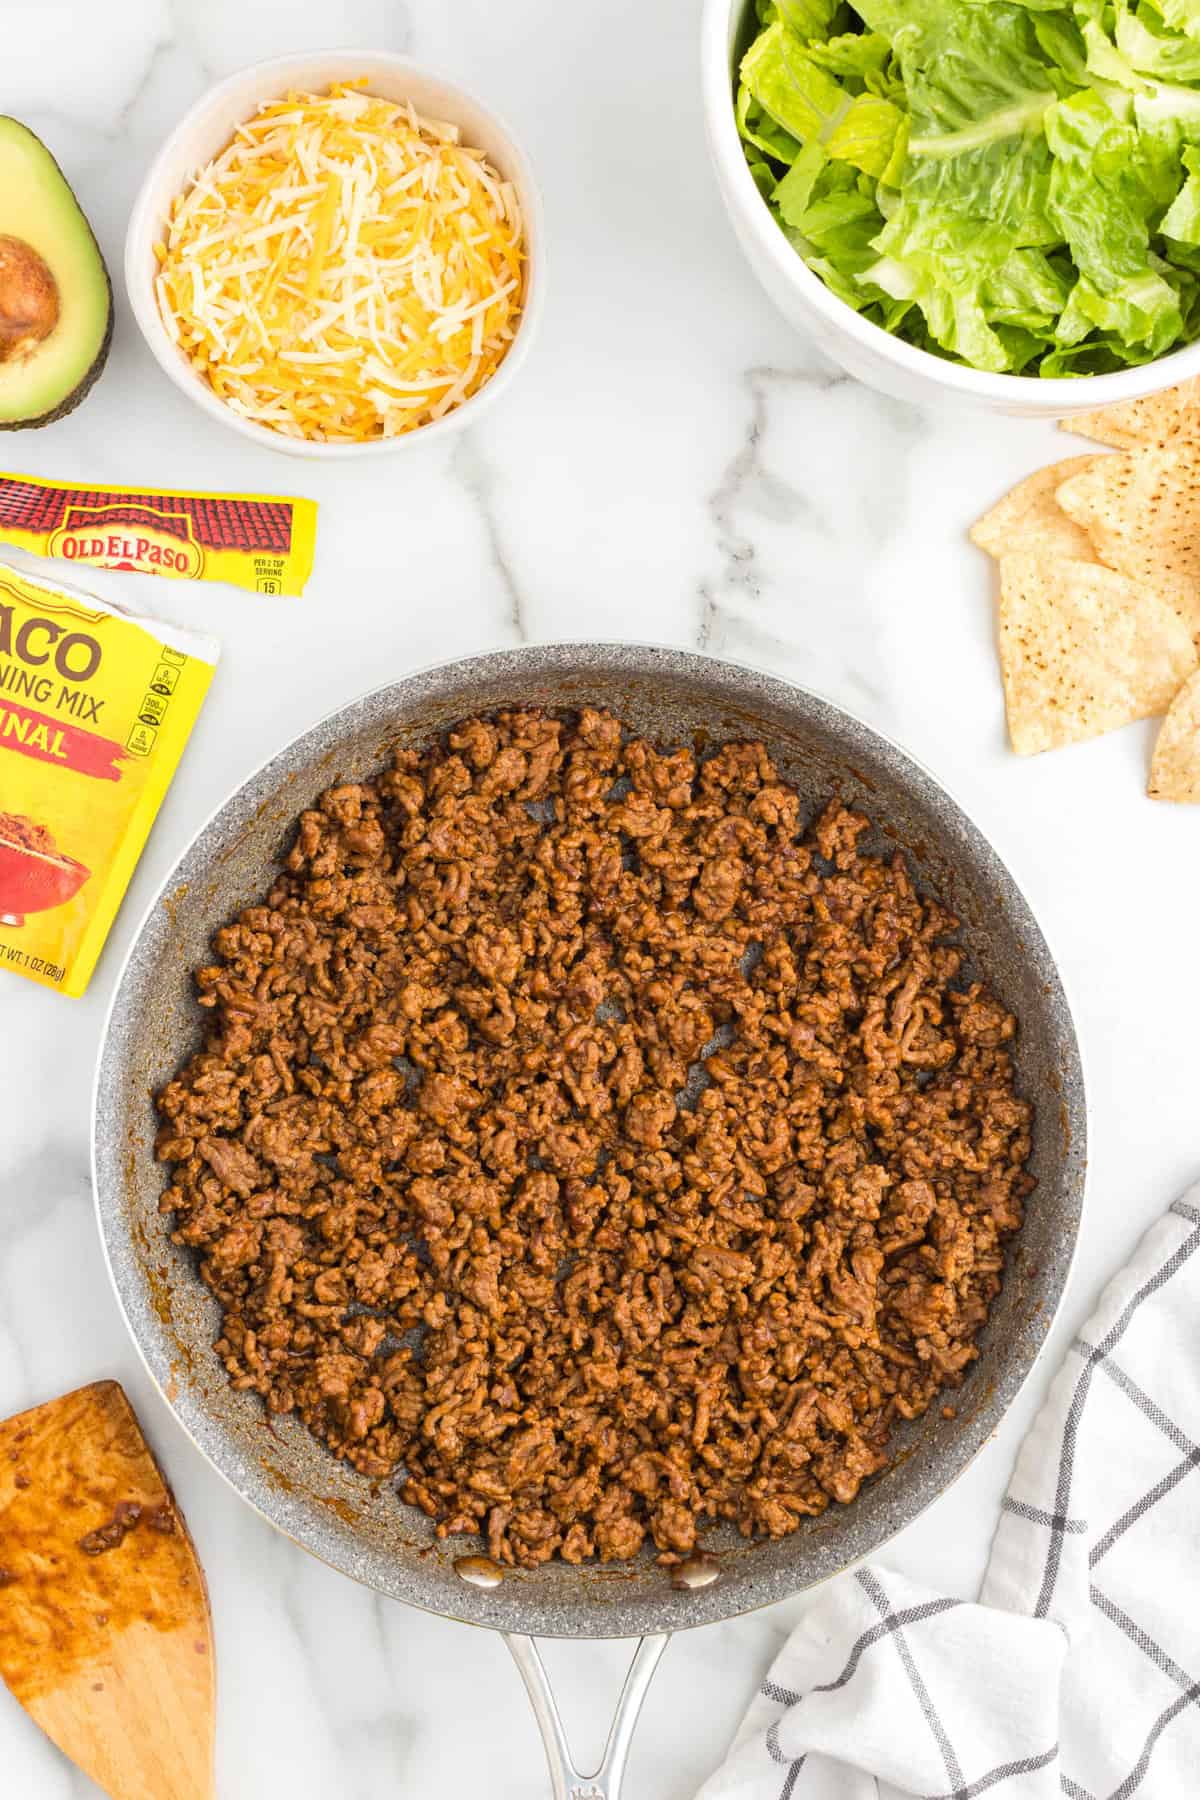 Ground beef, water, and taco seasoning in stovetop skillet for Taco Salad Recipe